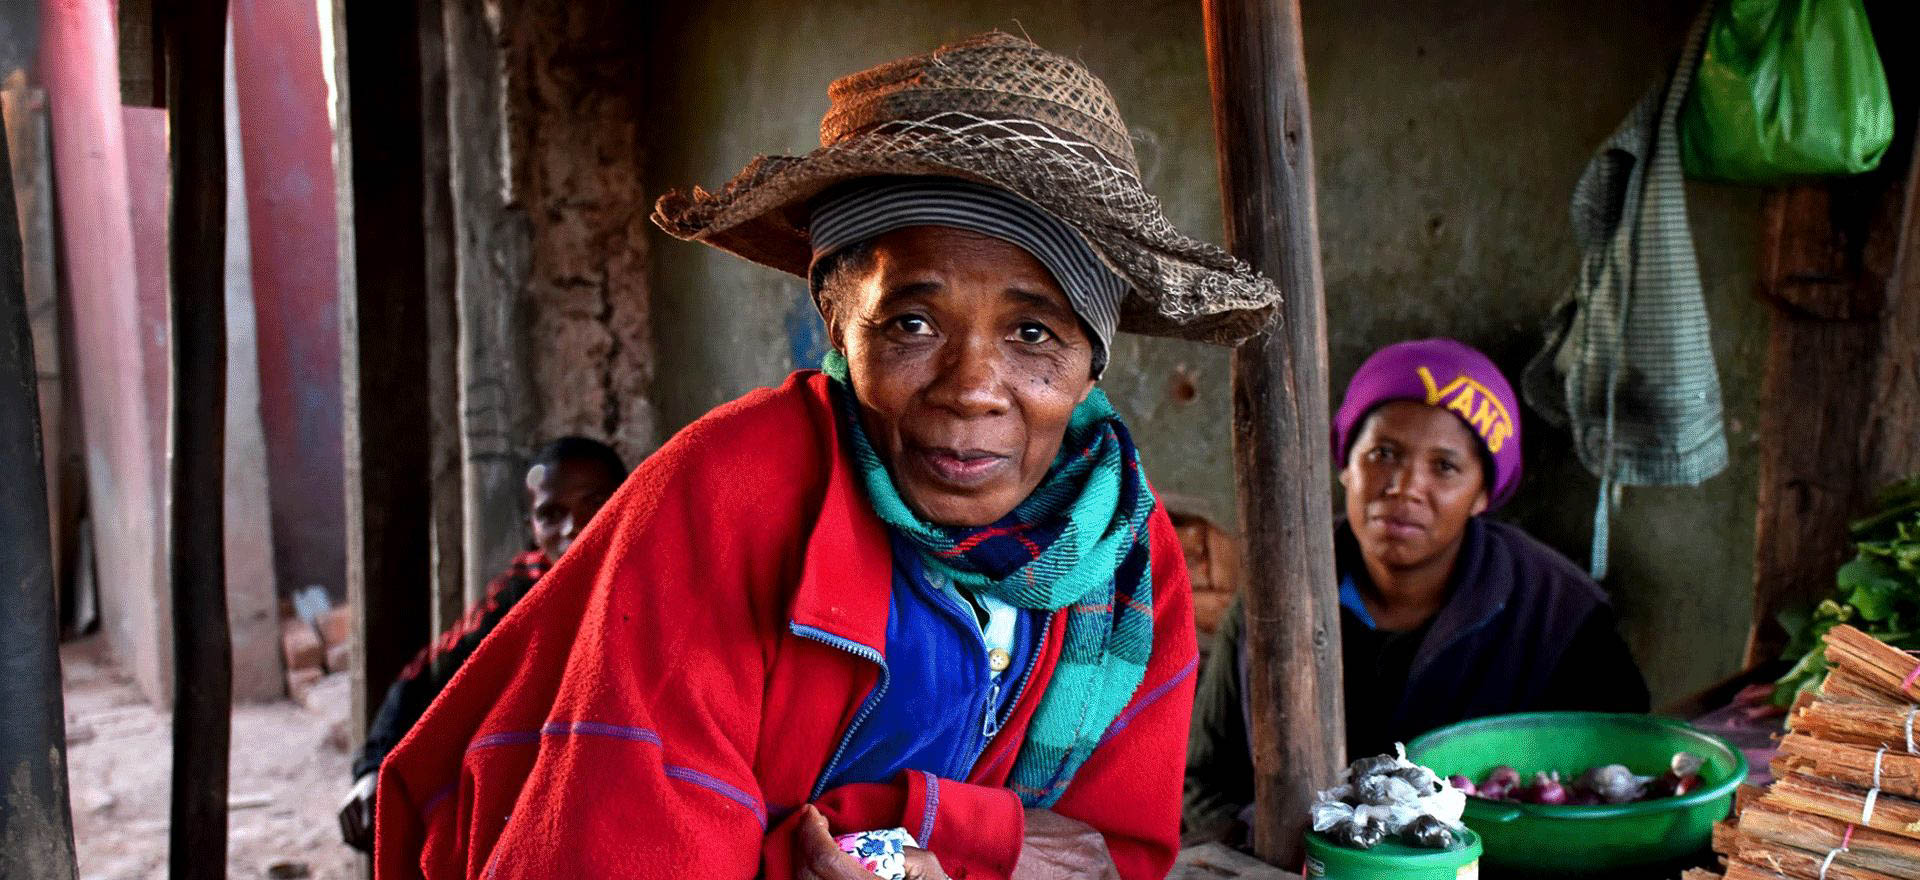 Woman in market in Madagascar highlands - Madagascar Holidays and Tours